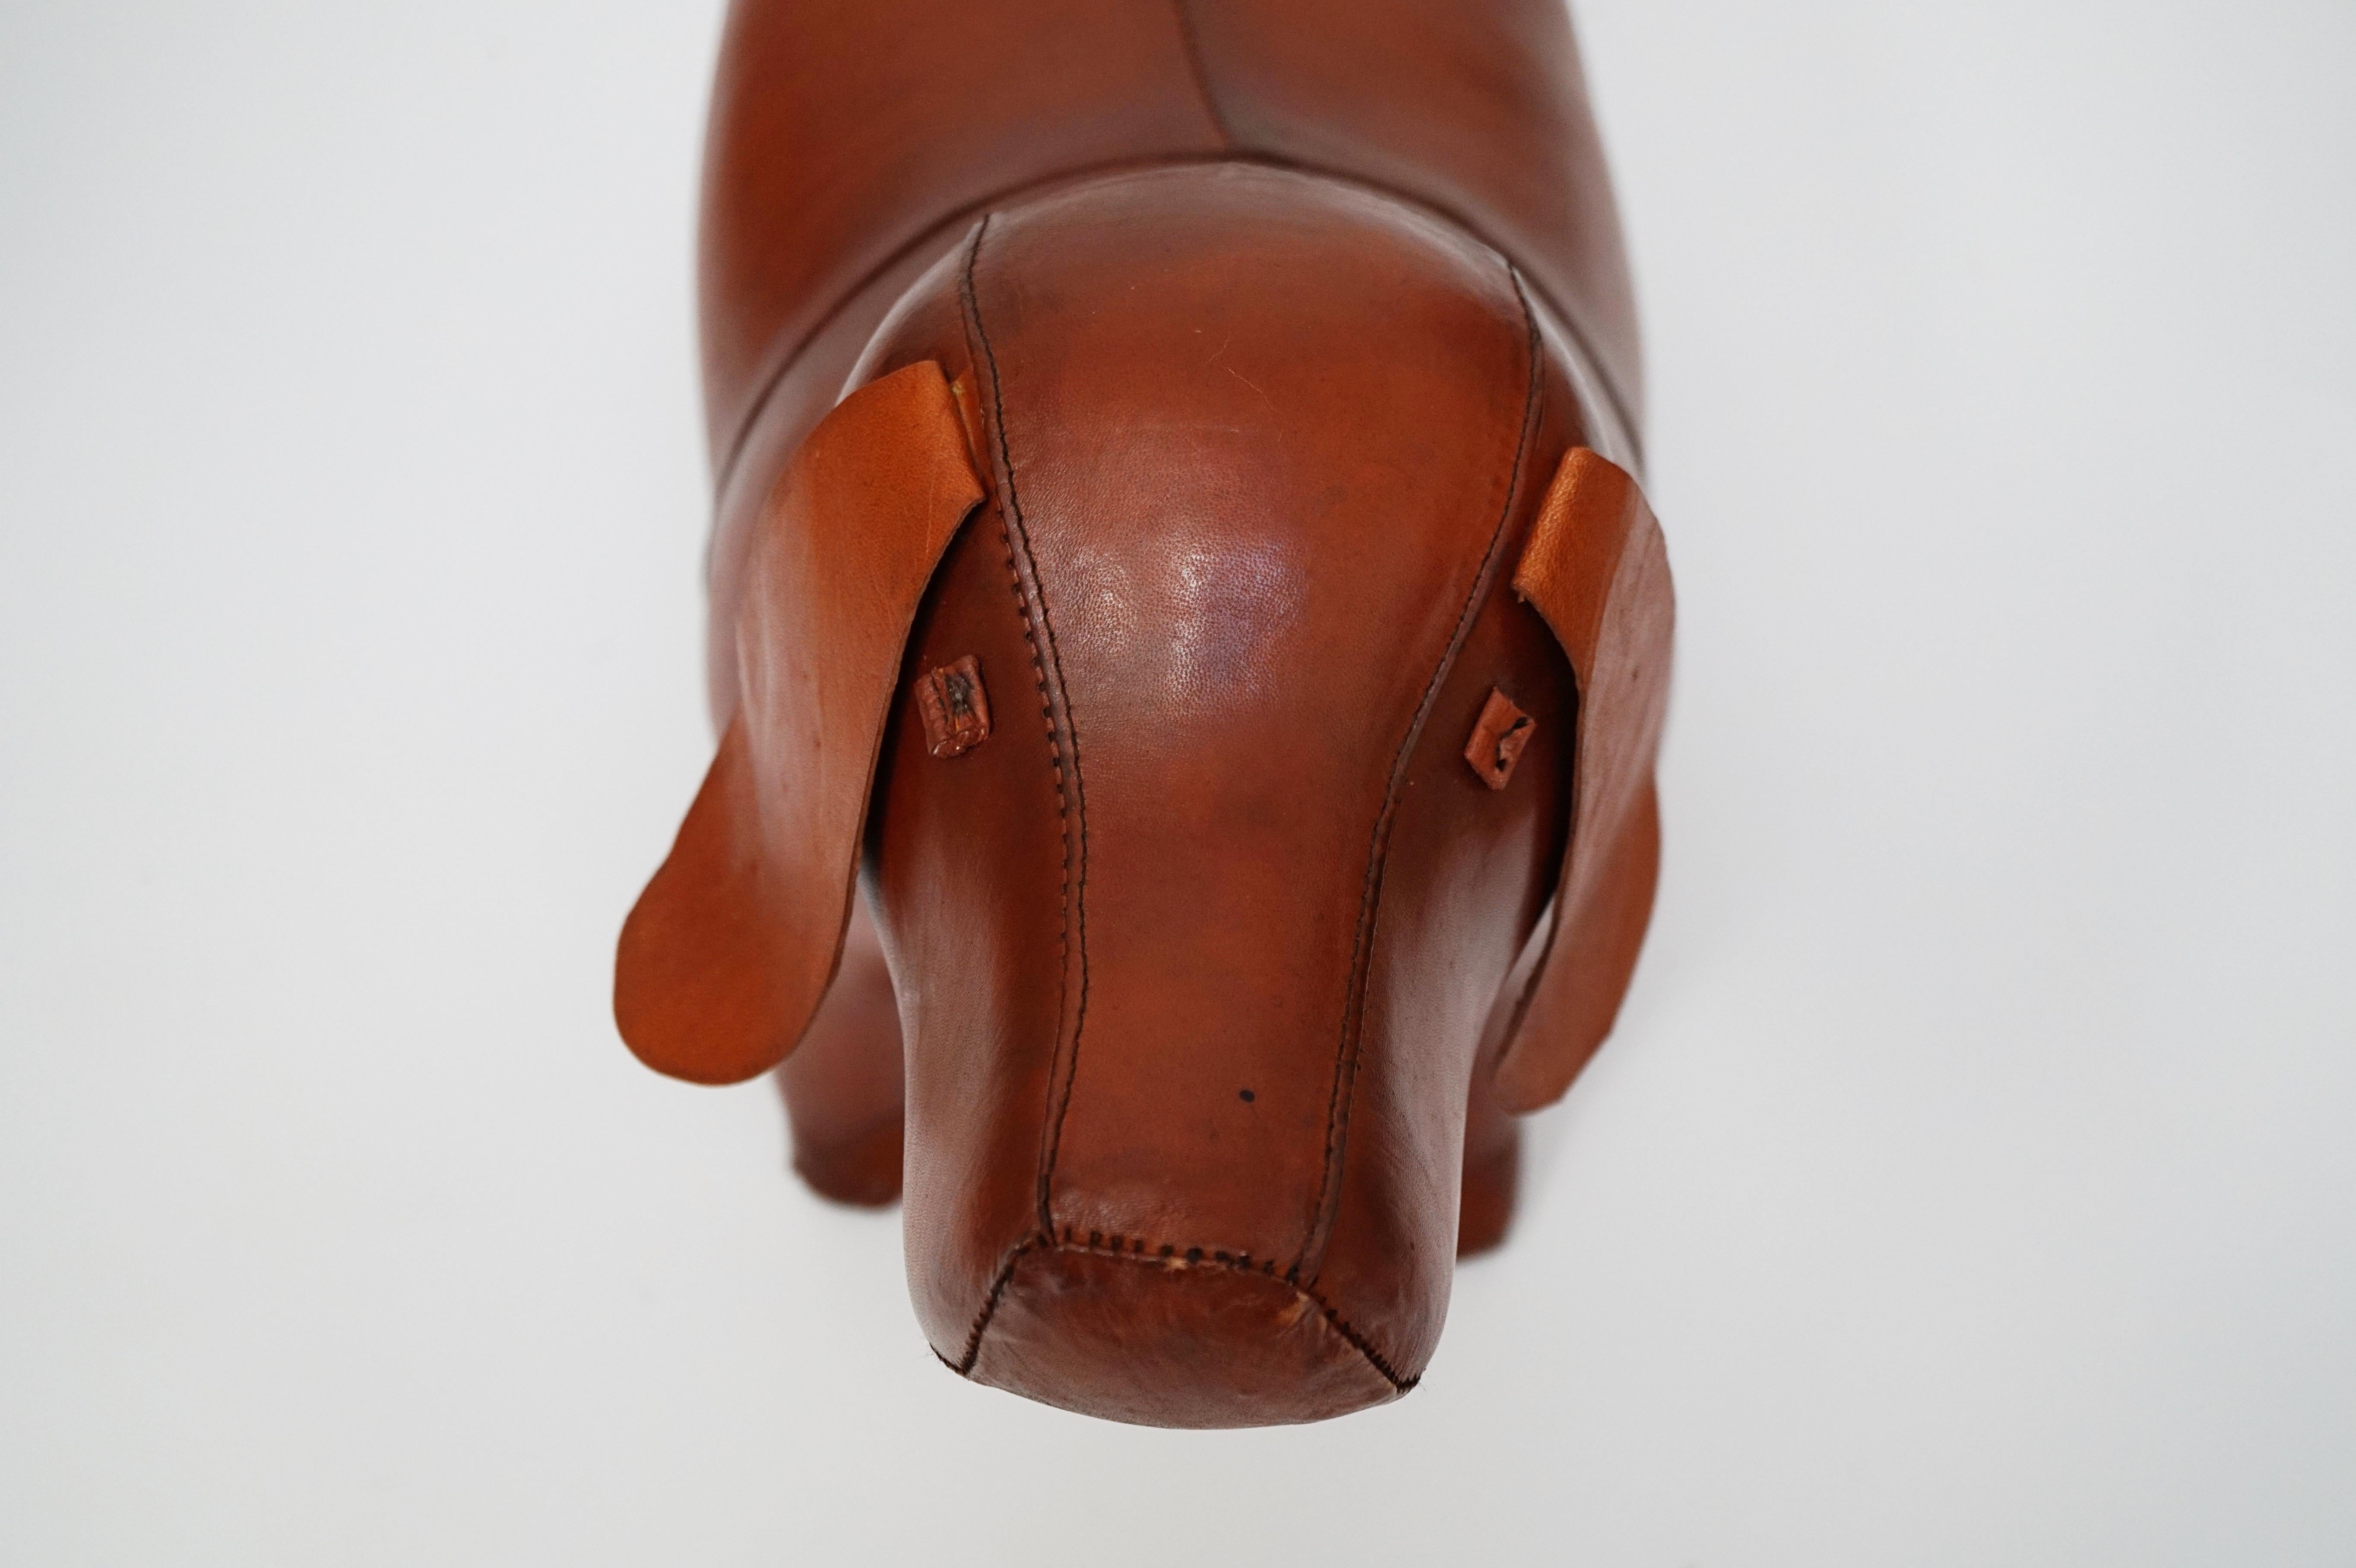 Leather Dog Footstool Attributed to Dimitri Omersa for Abercrombie & Fitch 7